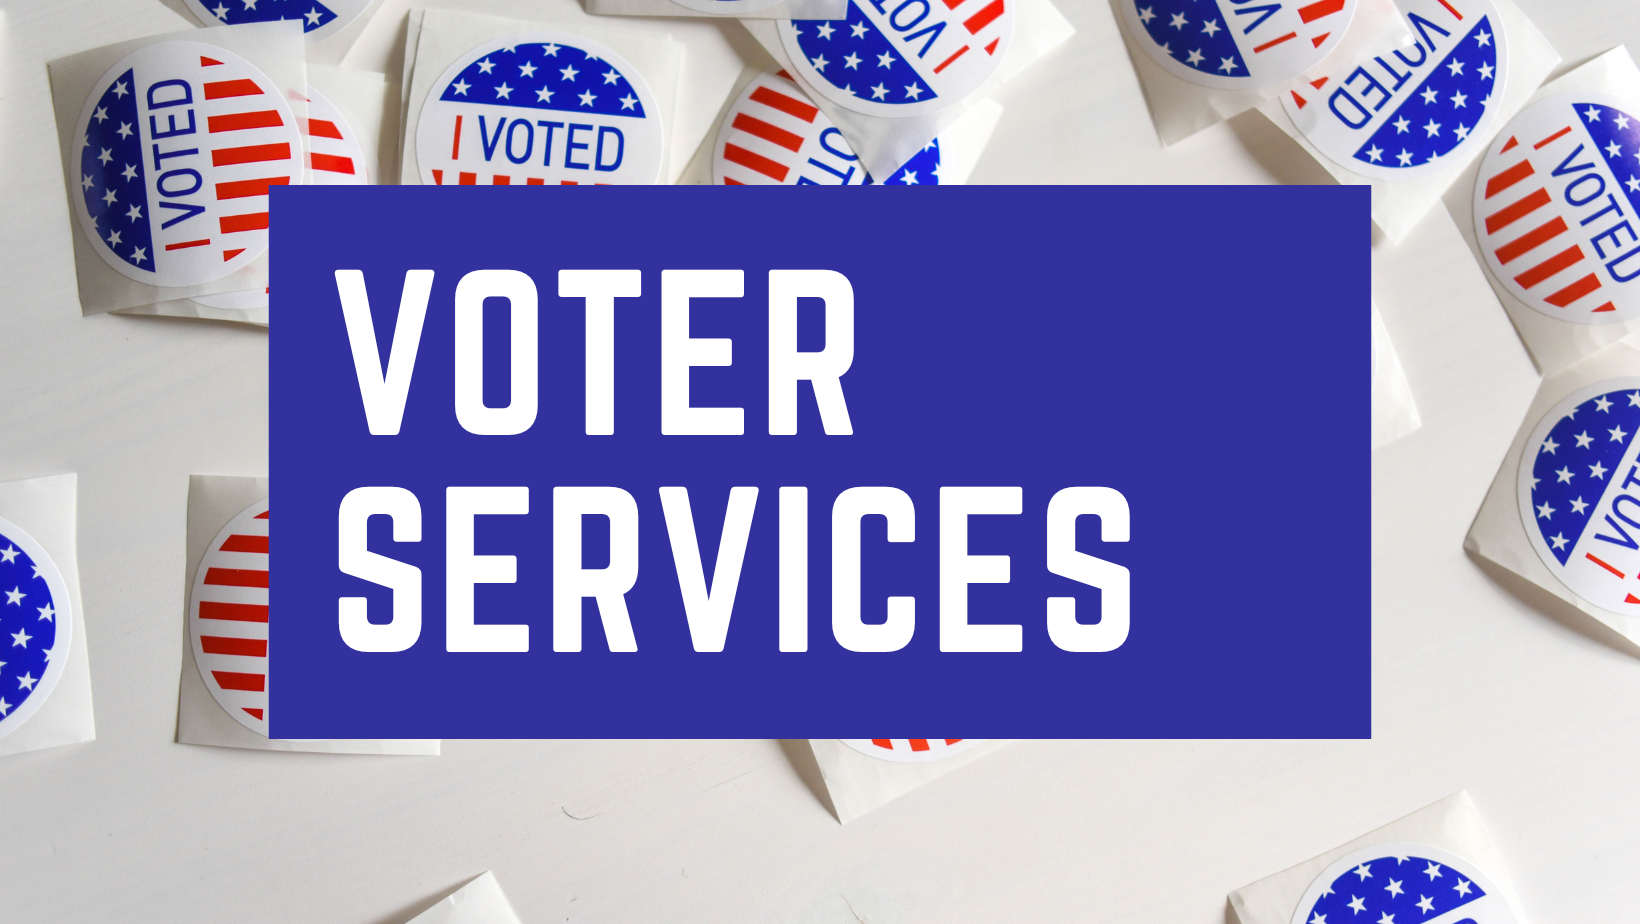 Voter Services text overlay image of red, white and blue "I Voted" stickers